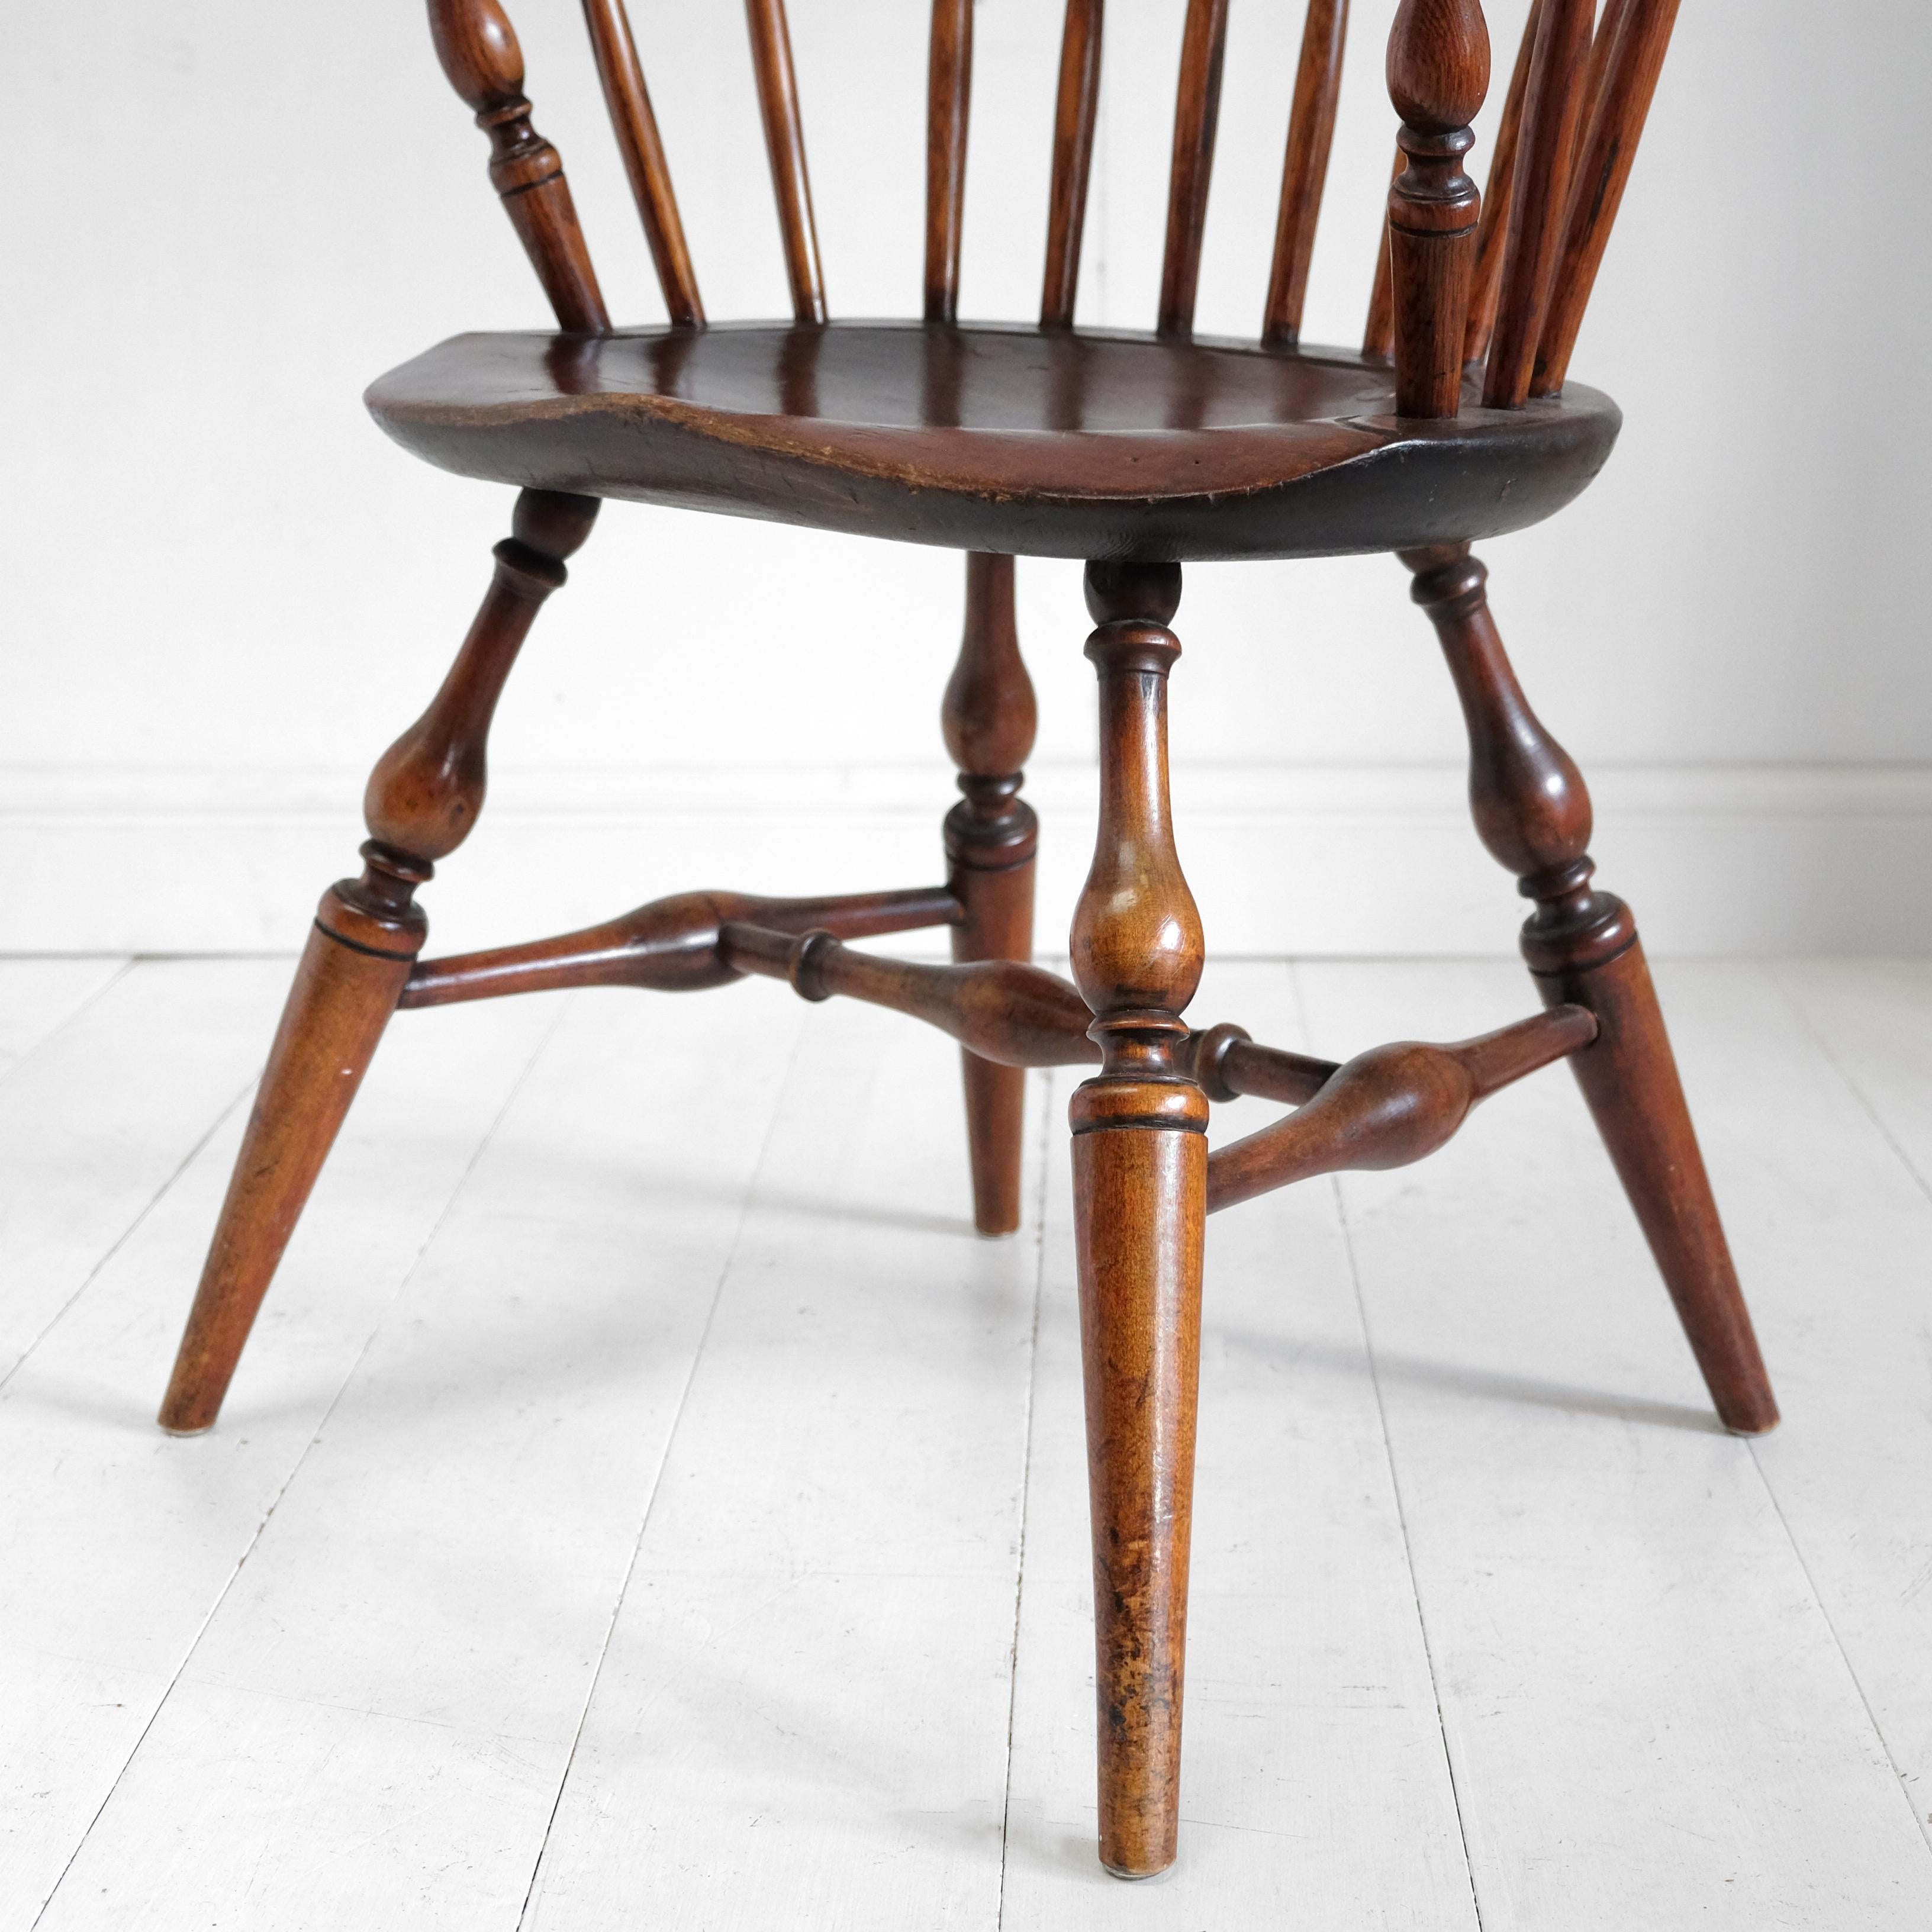 Late 18th Century American 'Sack Back' Windsor Chair with Provenance, 18th Century, Connecticut For Sale